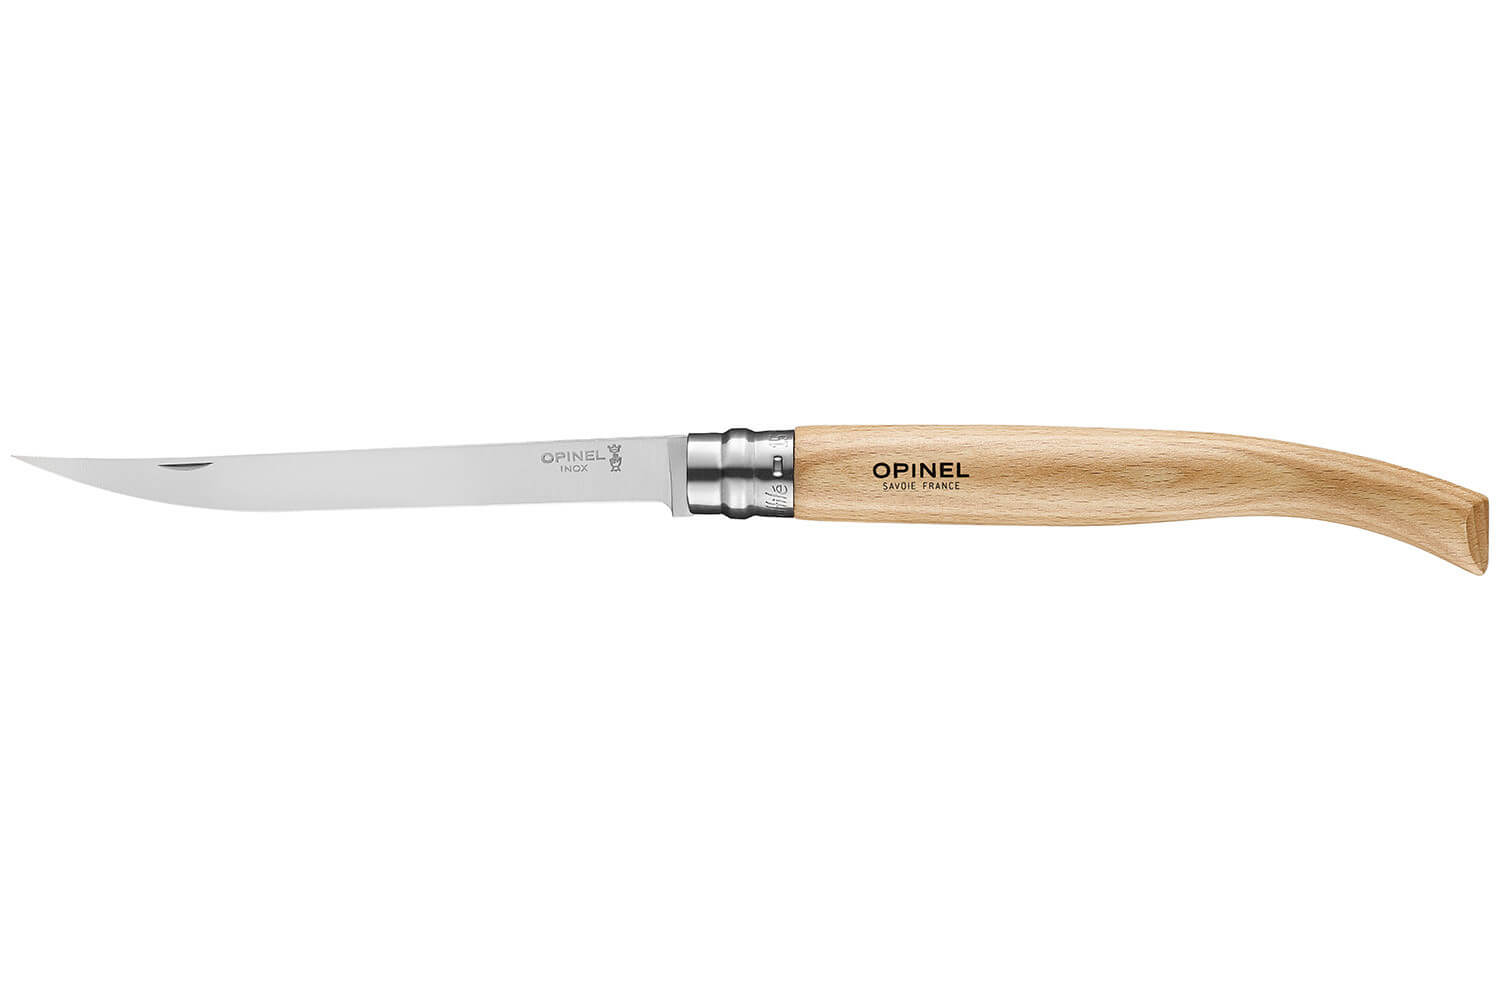 Couteau géant Opinel N°13 Inox - Opinel 13 - Couteaux Savoie